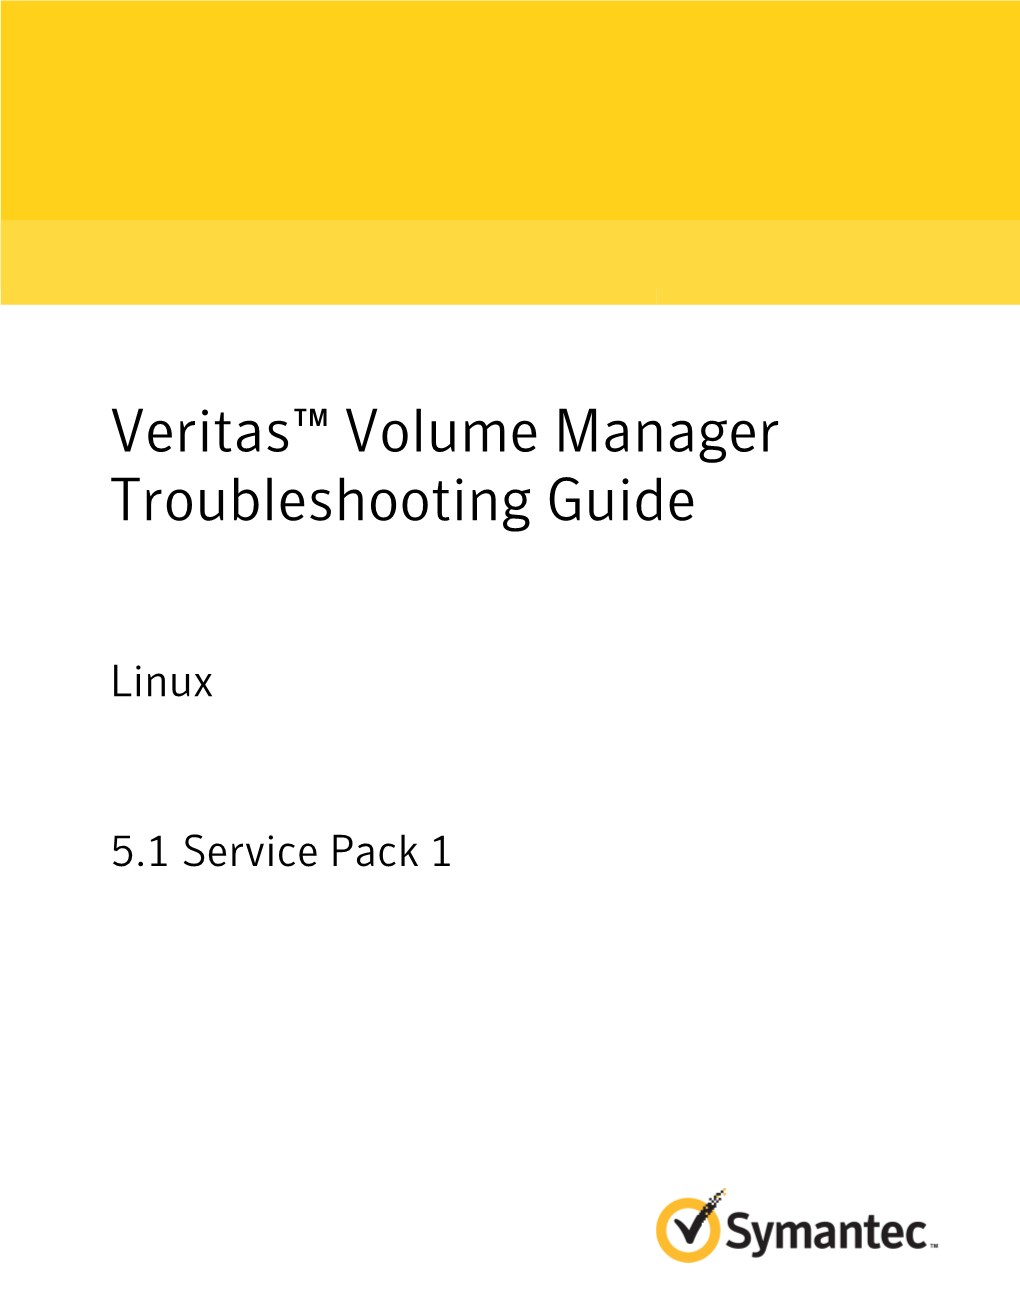 Veritas™ Volume Manager Troubleshooting Guide: Linux